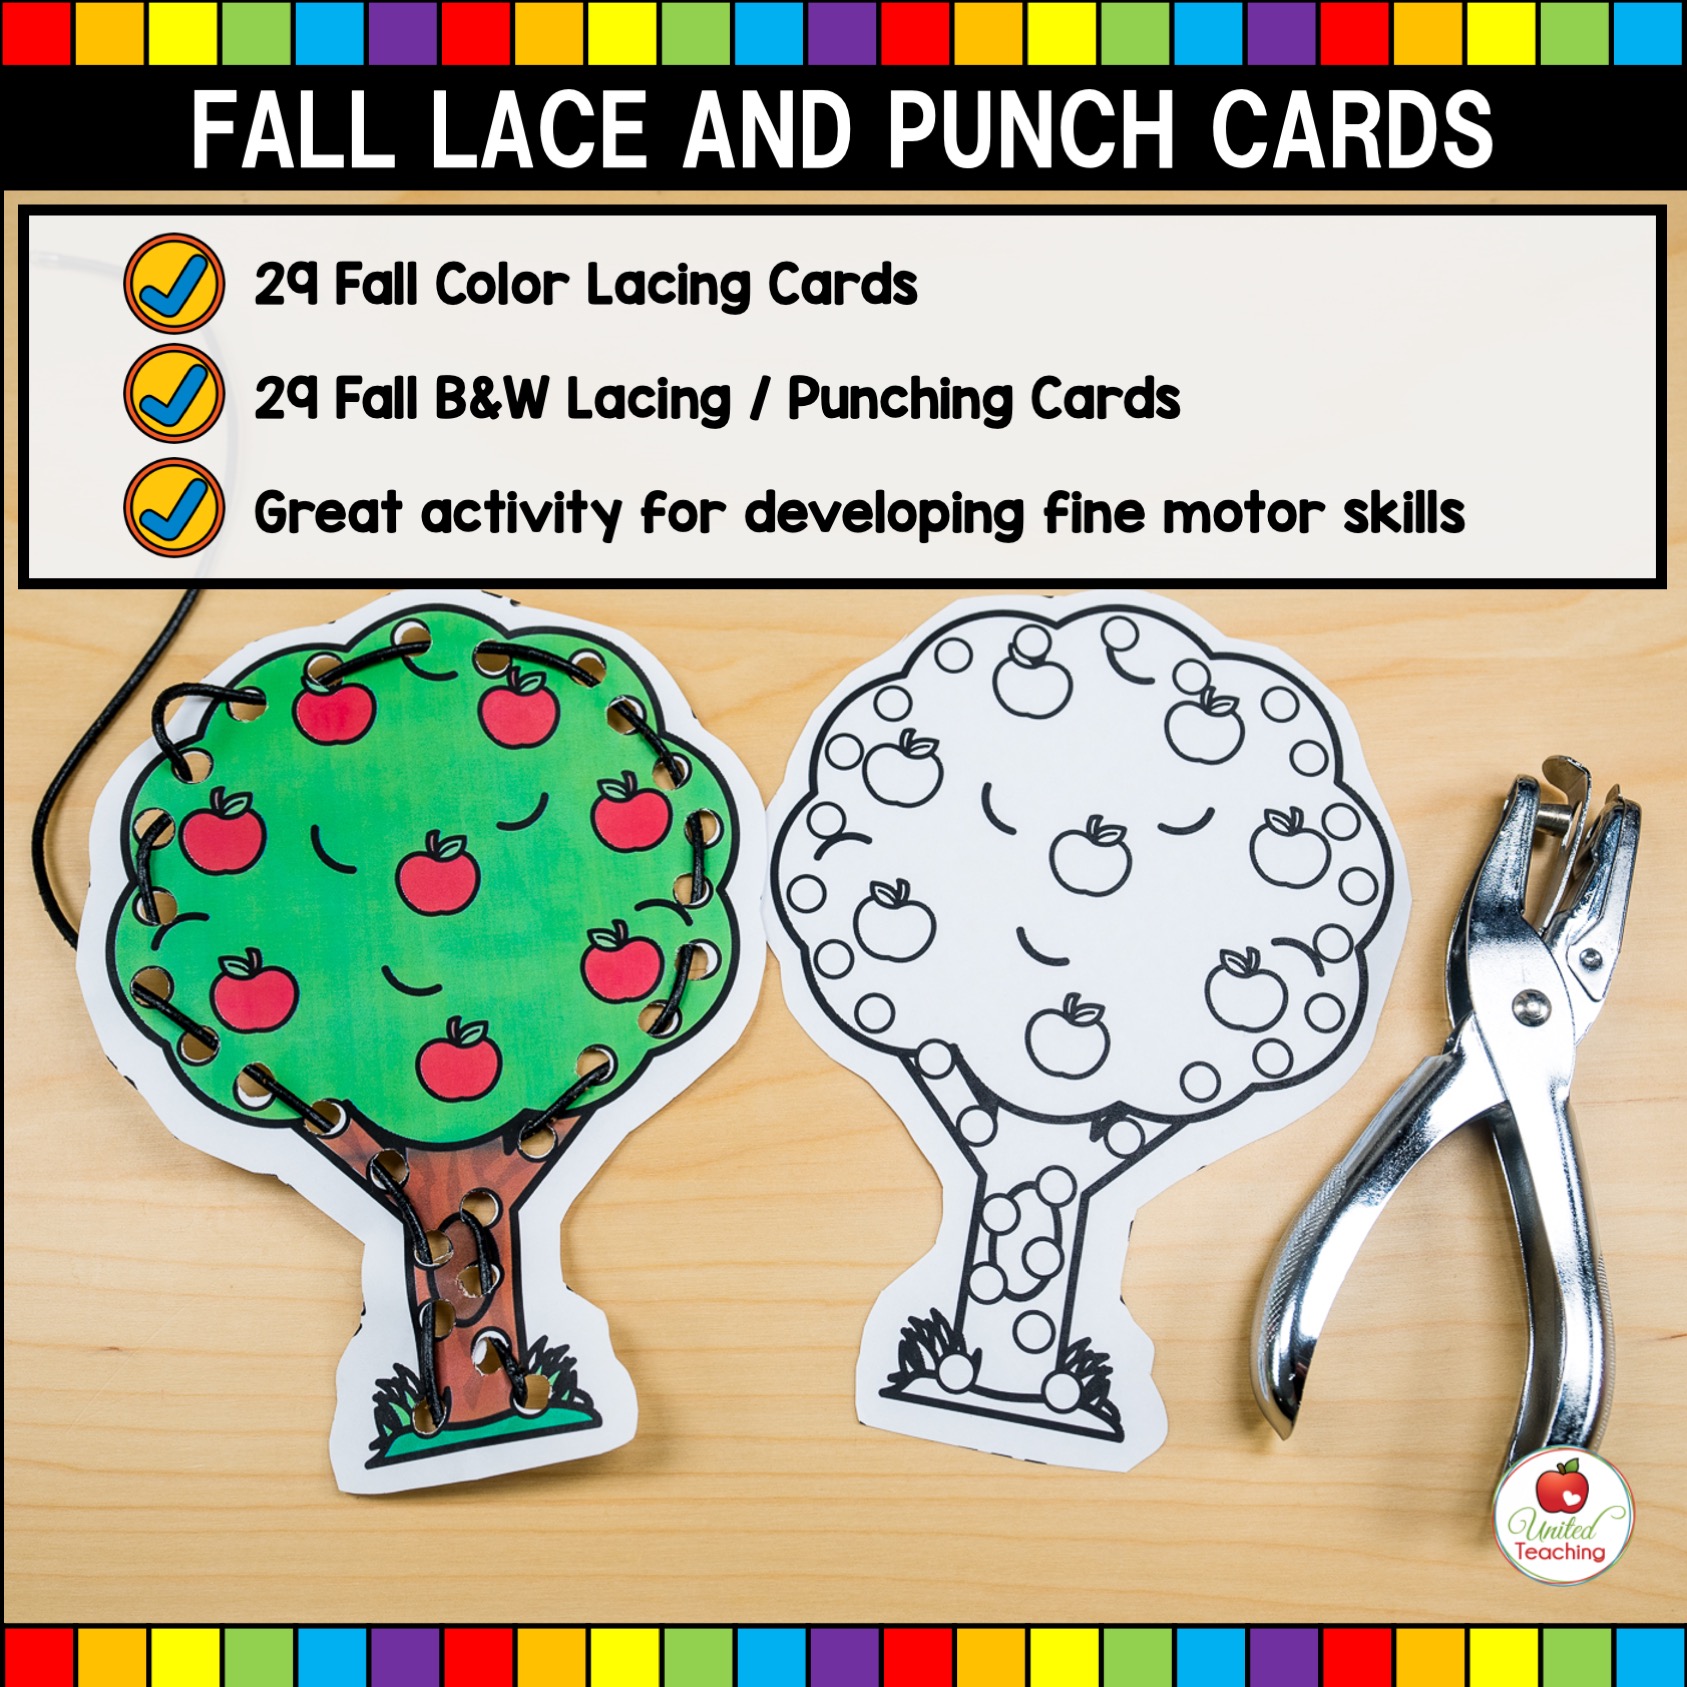 Fall Lace and Punch Cards - United Teaching